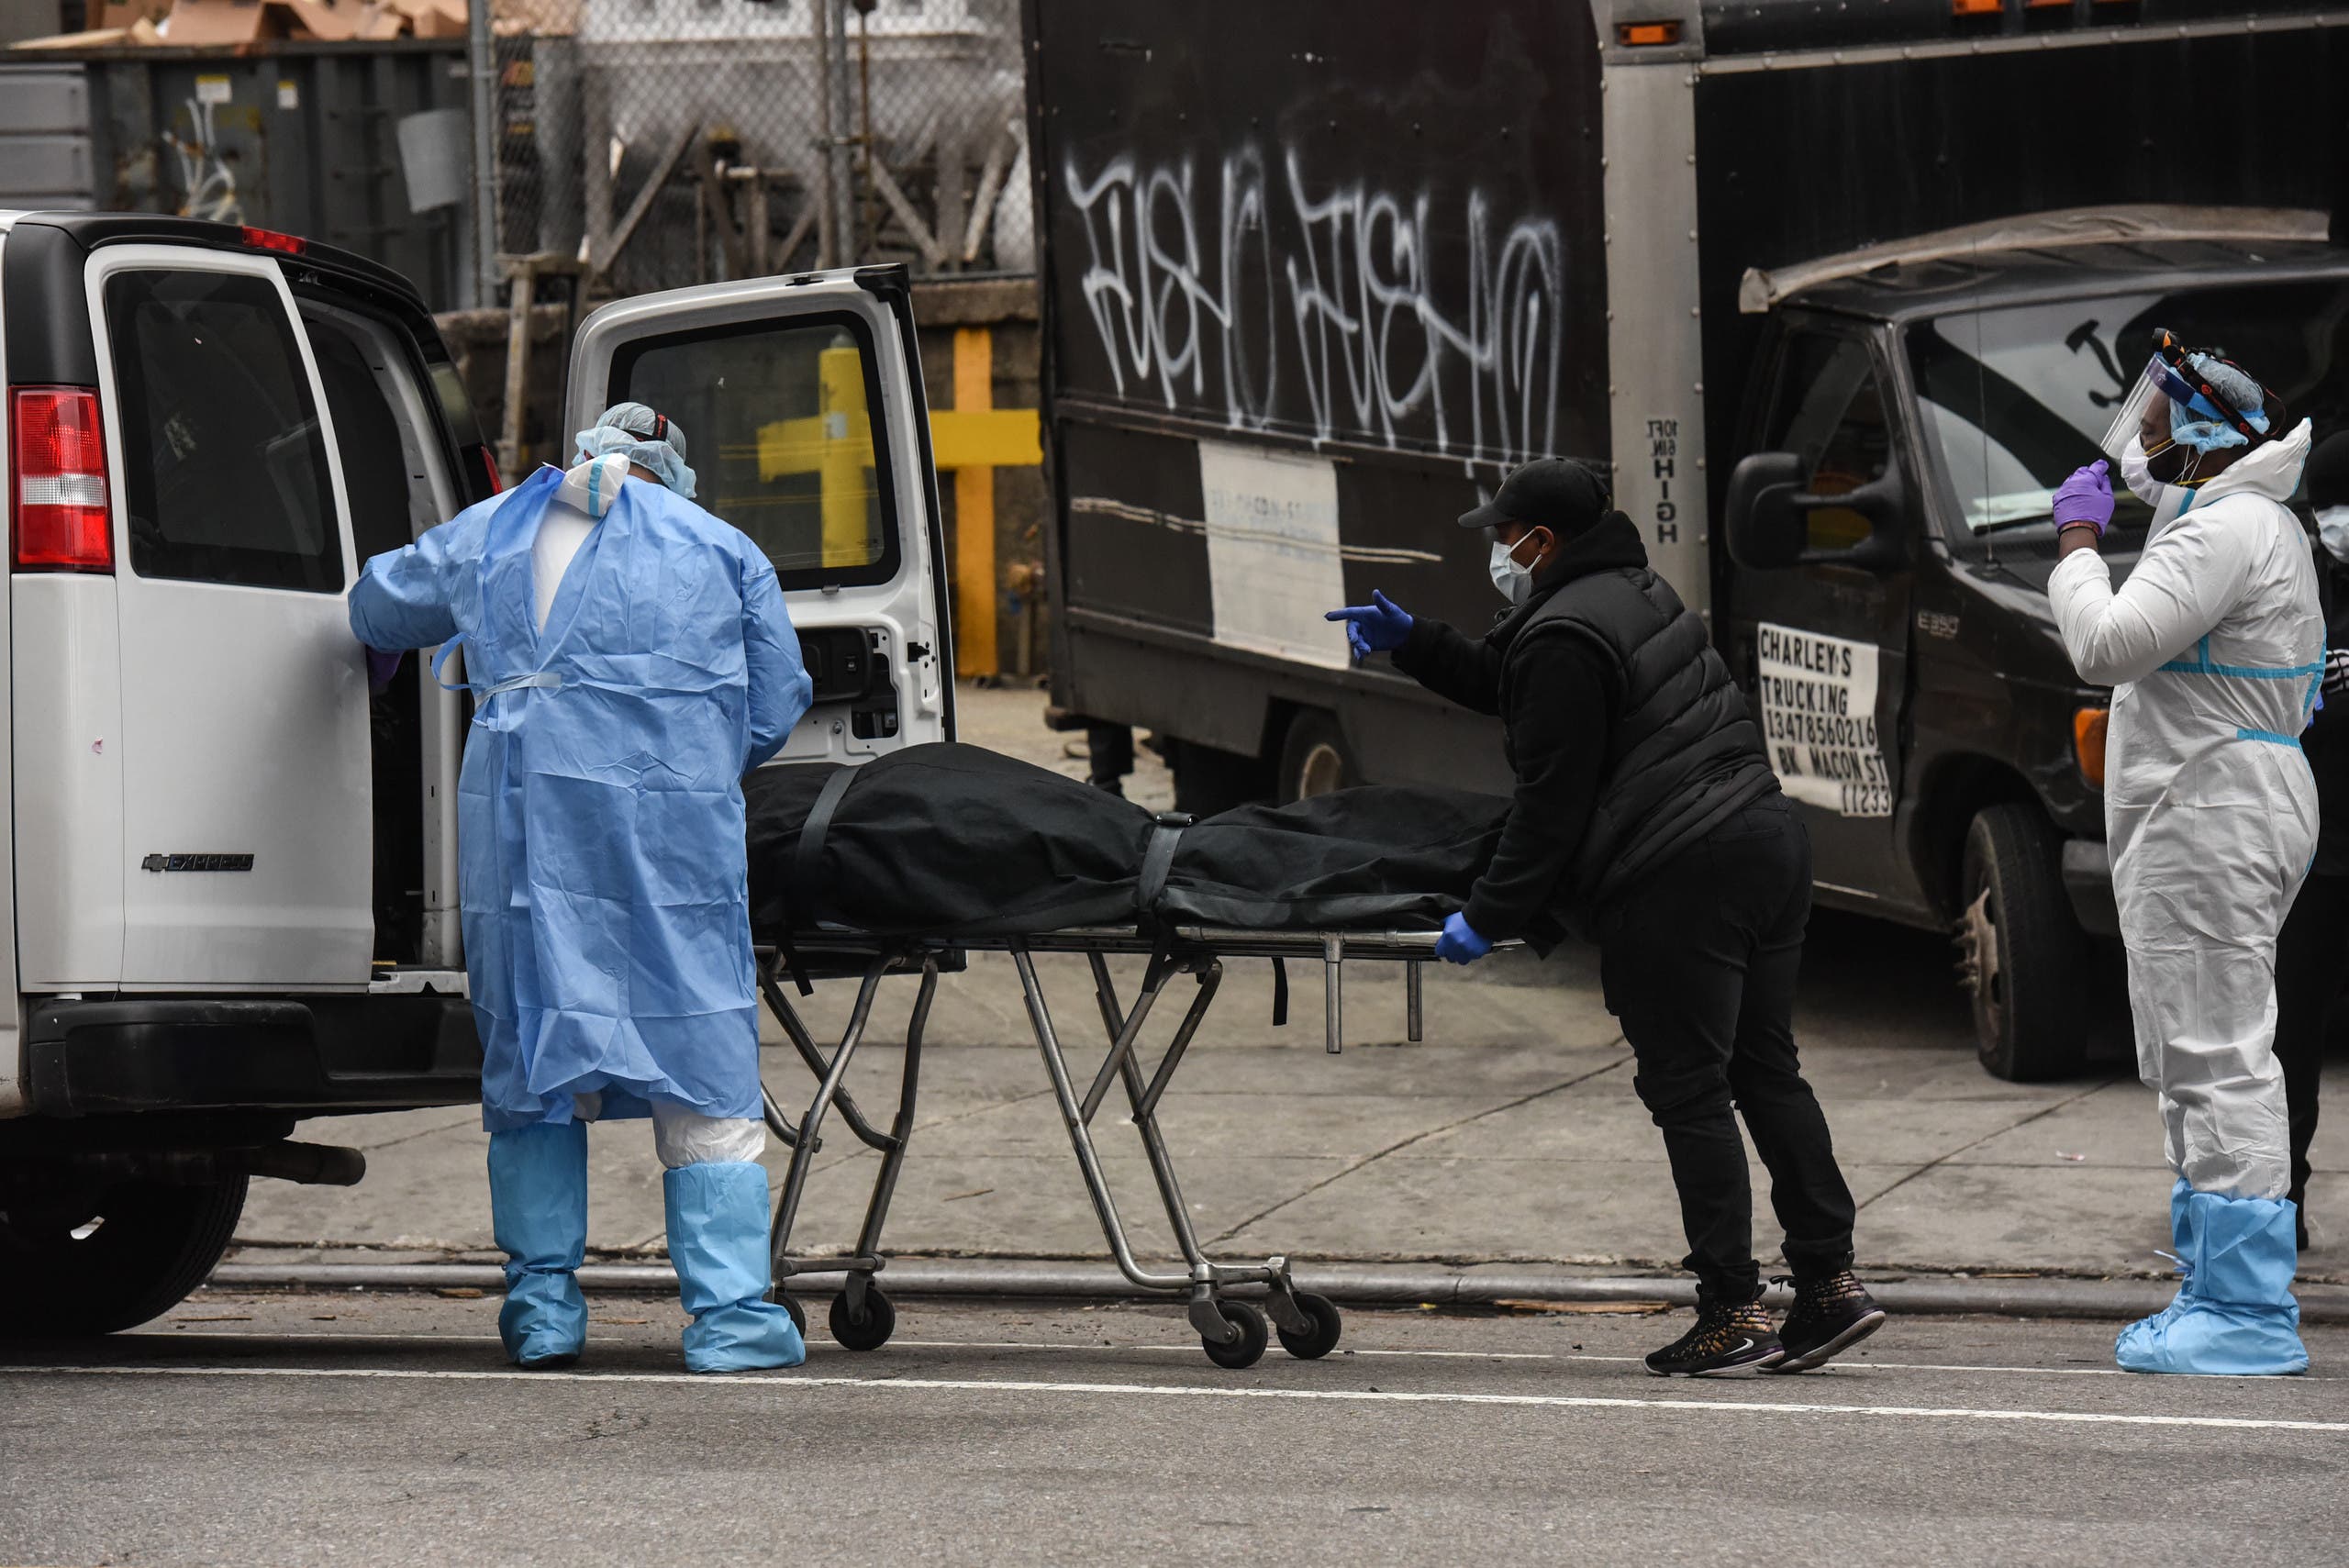 A funeral worker is assisted moving a deceased patient into a van at the Brooklyn Hospital Center on April 27, 2020 in the Brooklyn borough of New York City. (AFP)